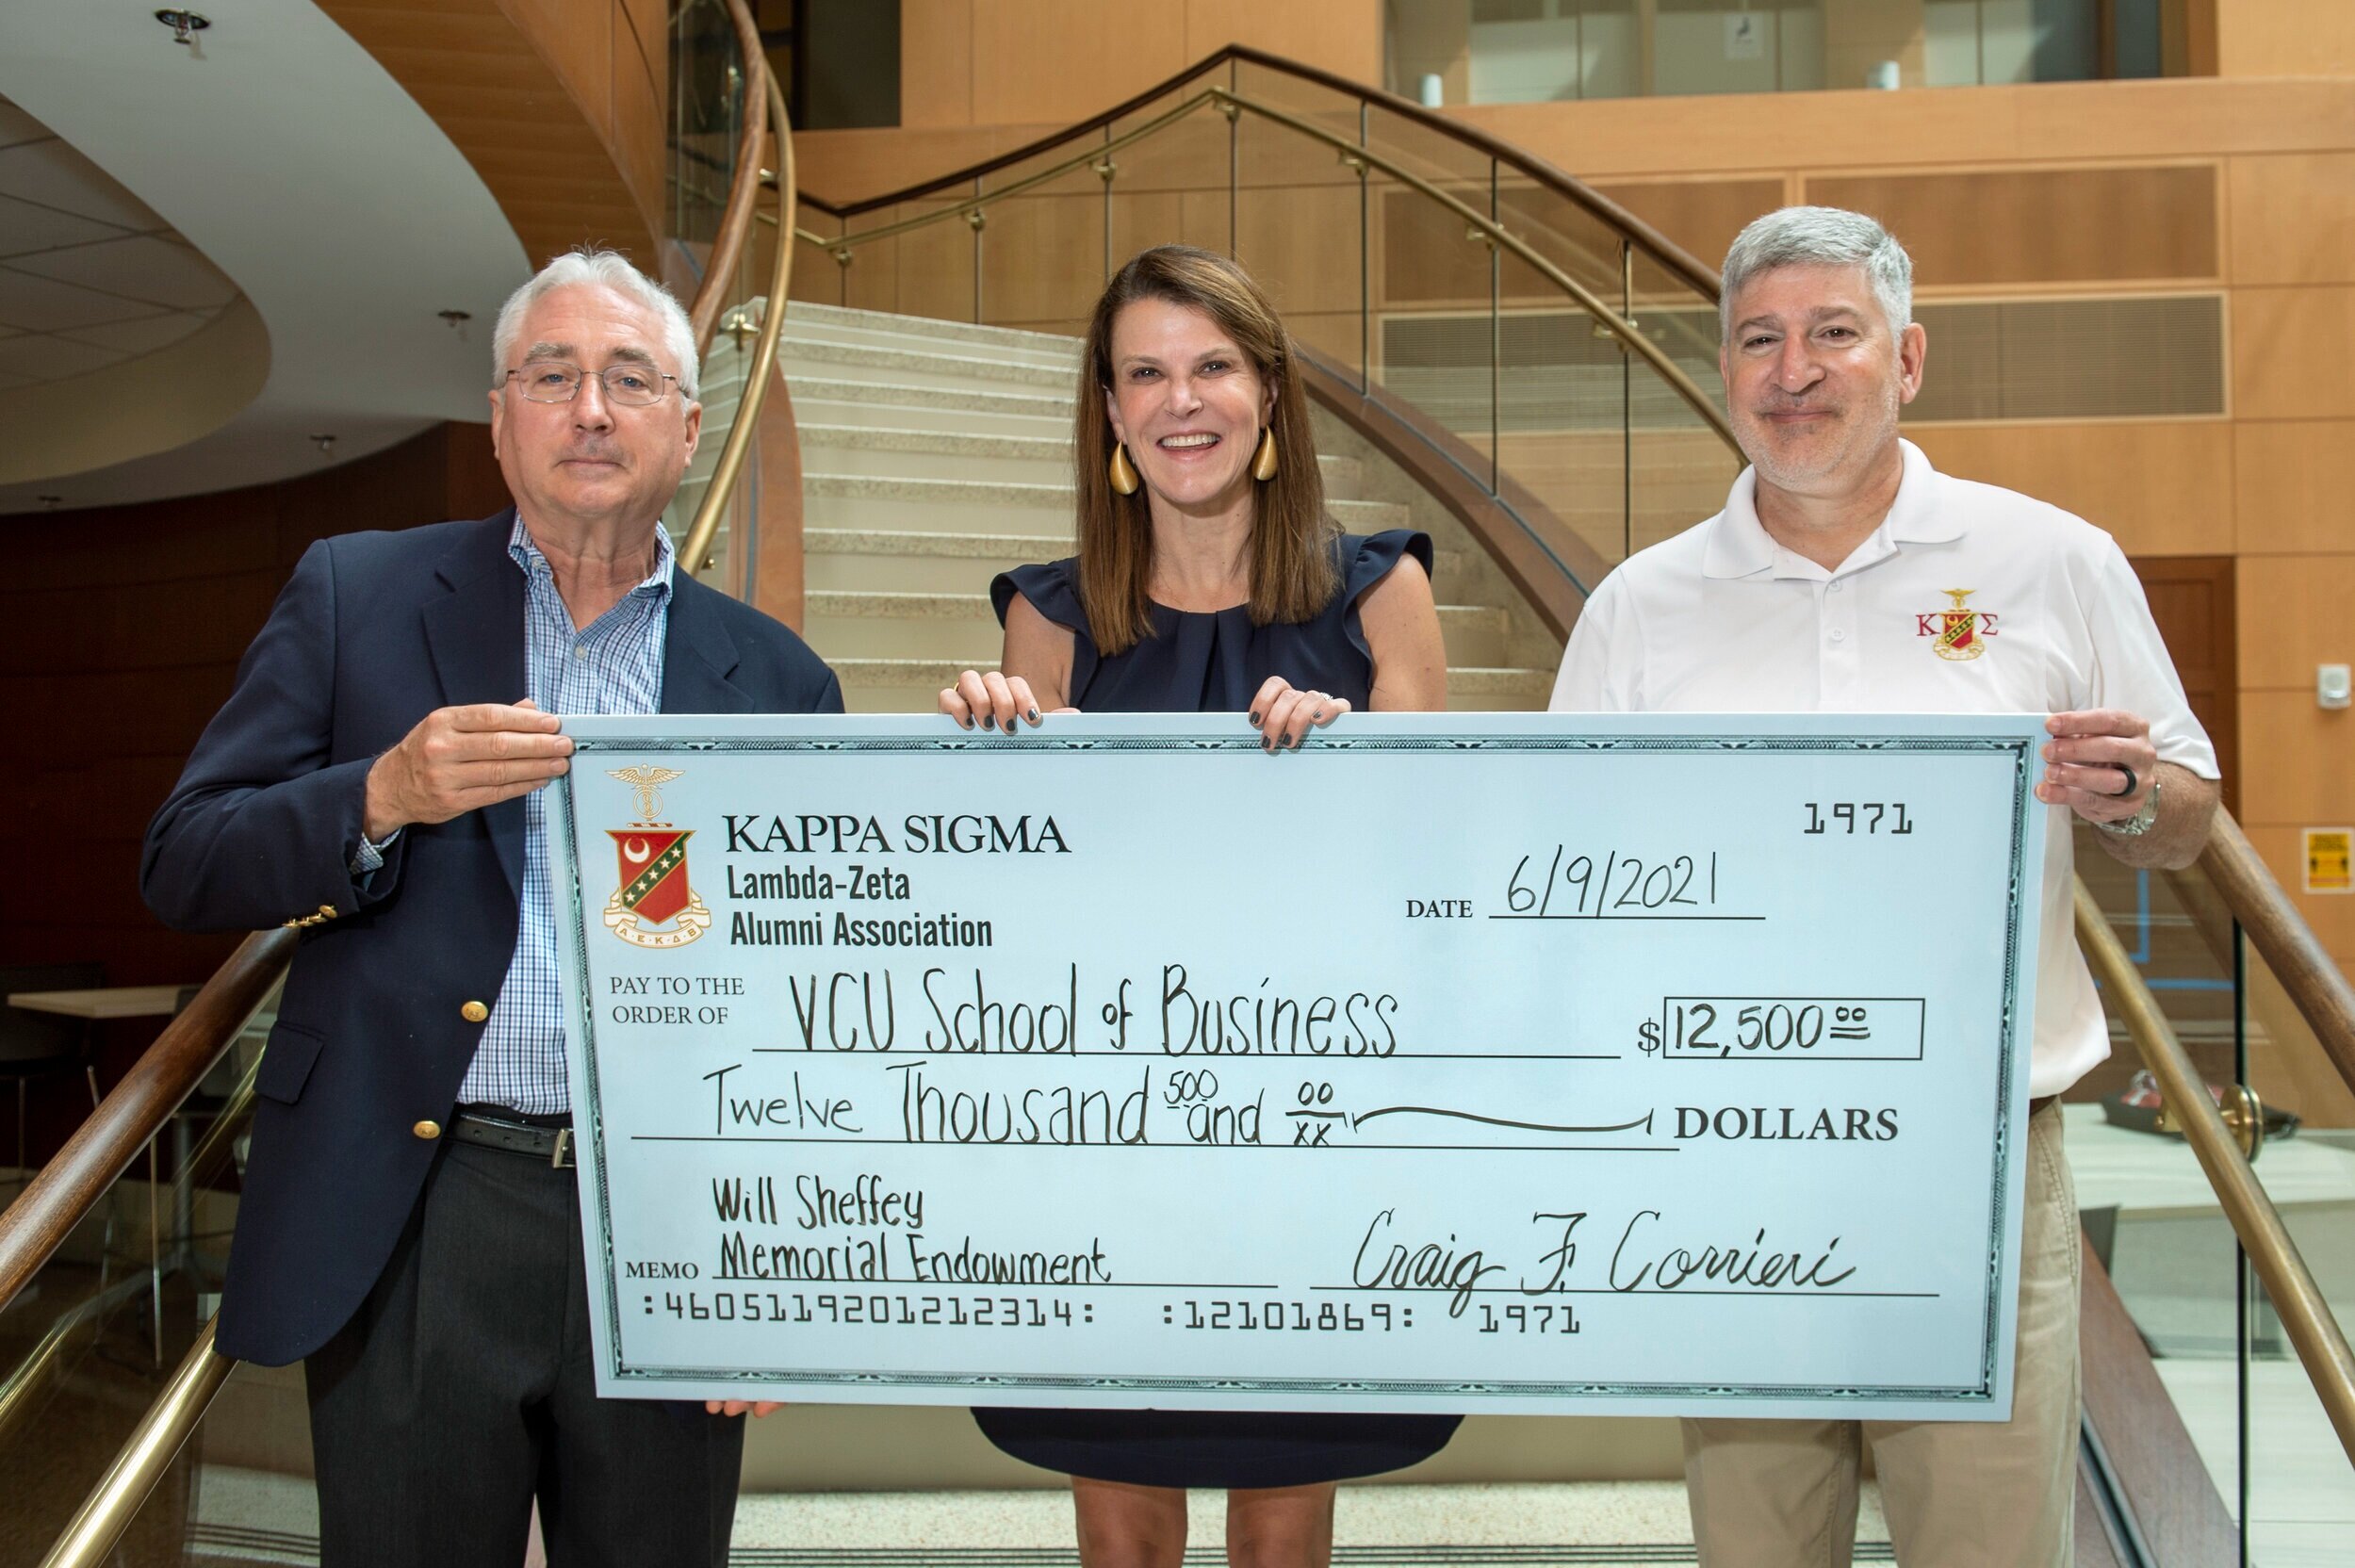   VCU’s Cheryl Slokker, Communications Director, and Katy Beisheim, Associate Director of Development (in glasses picture #2) accept a check to the Endowment on behalf of the VCU School of Business. Brad Welles and Craig Corrieri representing the End